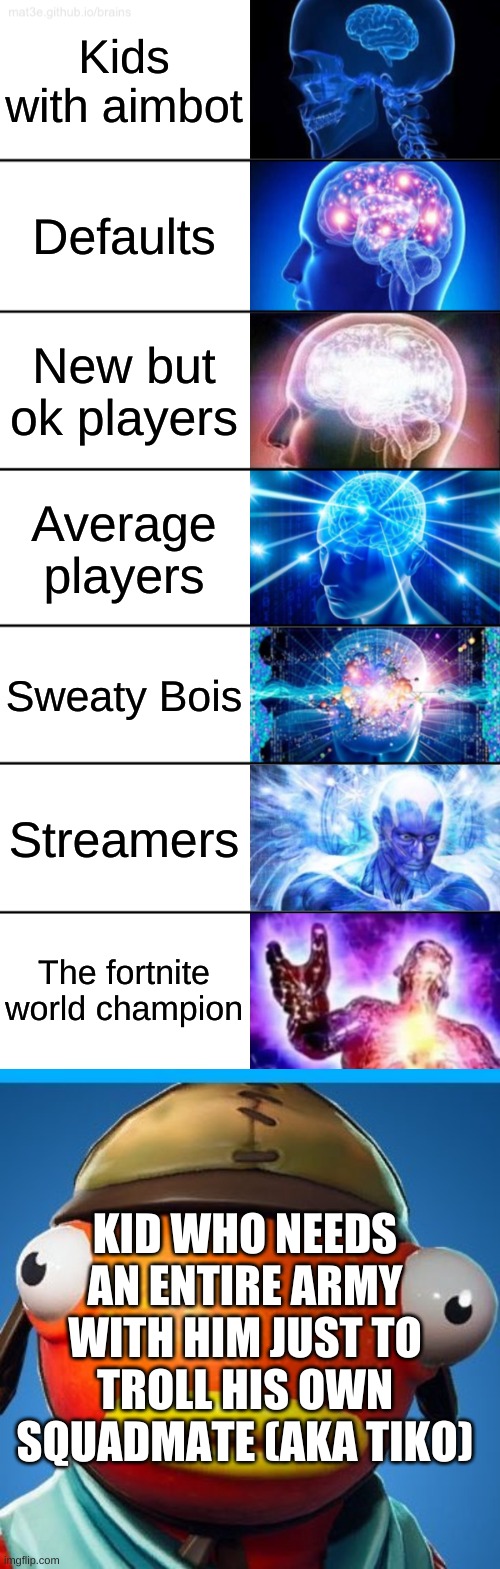  Kids with aimbot; Defaults; New but ok players; Average players; Sweaty Bois; Streamers; The fortnite world champion; KID WHO NEEDS AN ENTIRE ARMY WITH HIM JUST TO TROLL HIS OWN SQUADMATE (AKA TIKO) | image tagged in 7-tier expanding brain,fishstick | made w/ Imgflip meme maker